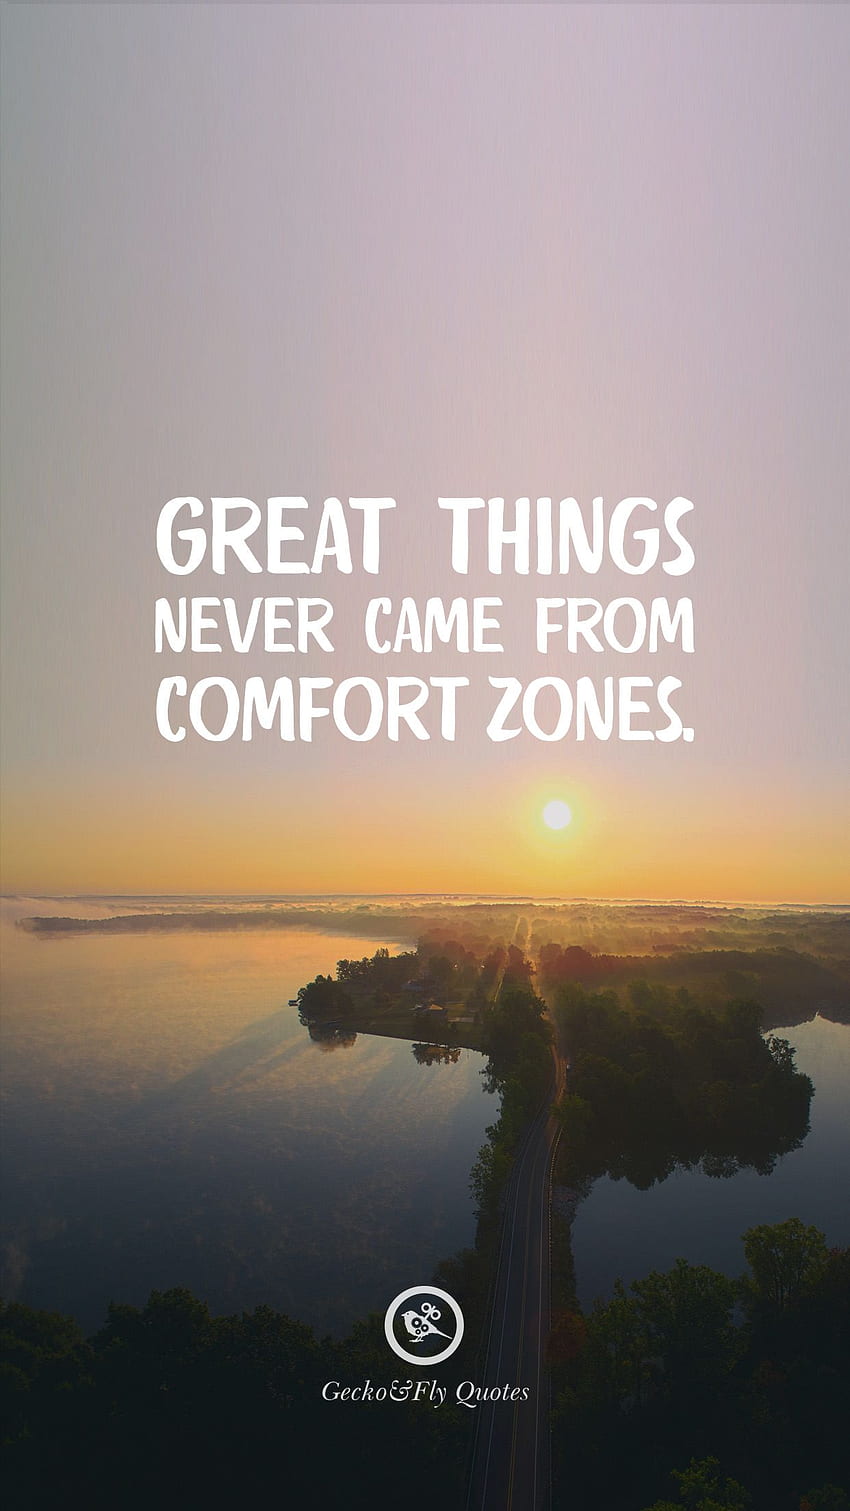 Great things never came from comfort zones. quotes, Fly quotes, Motivational quotes HD phone wallpaper